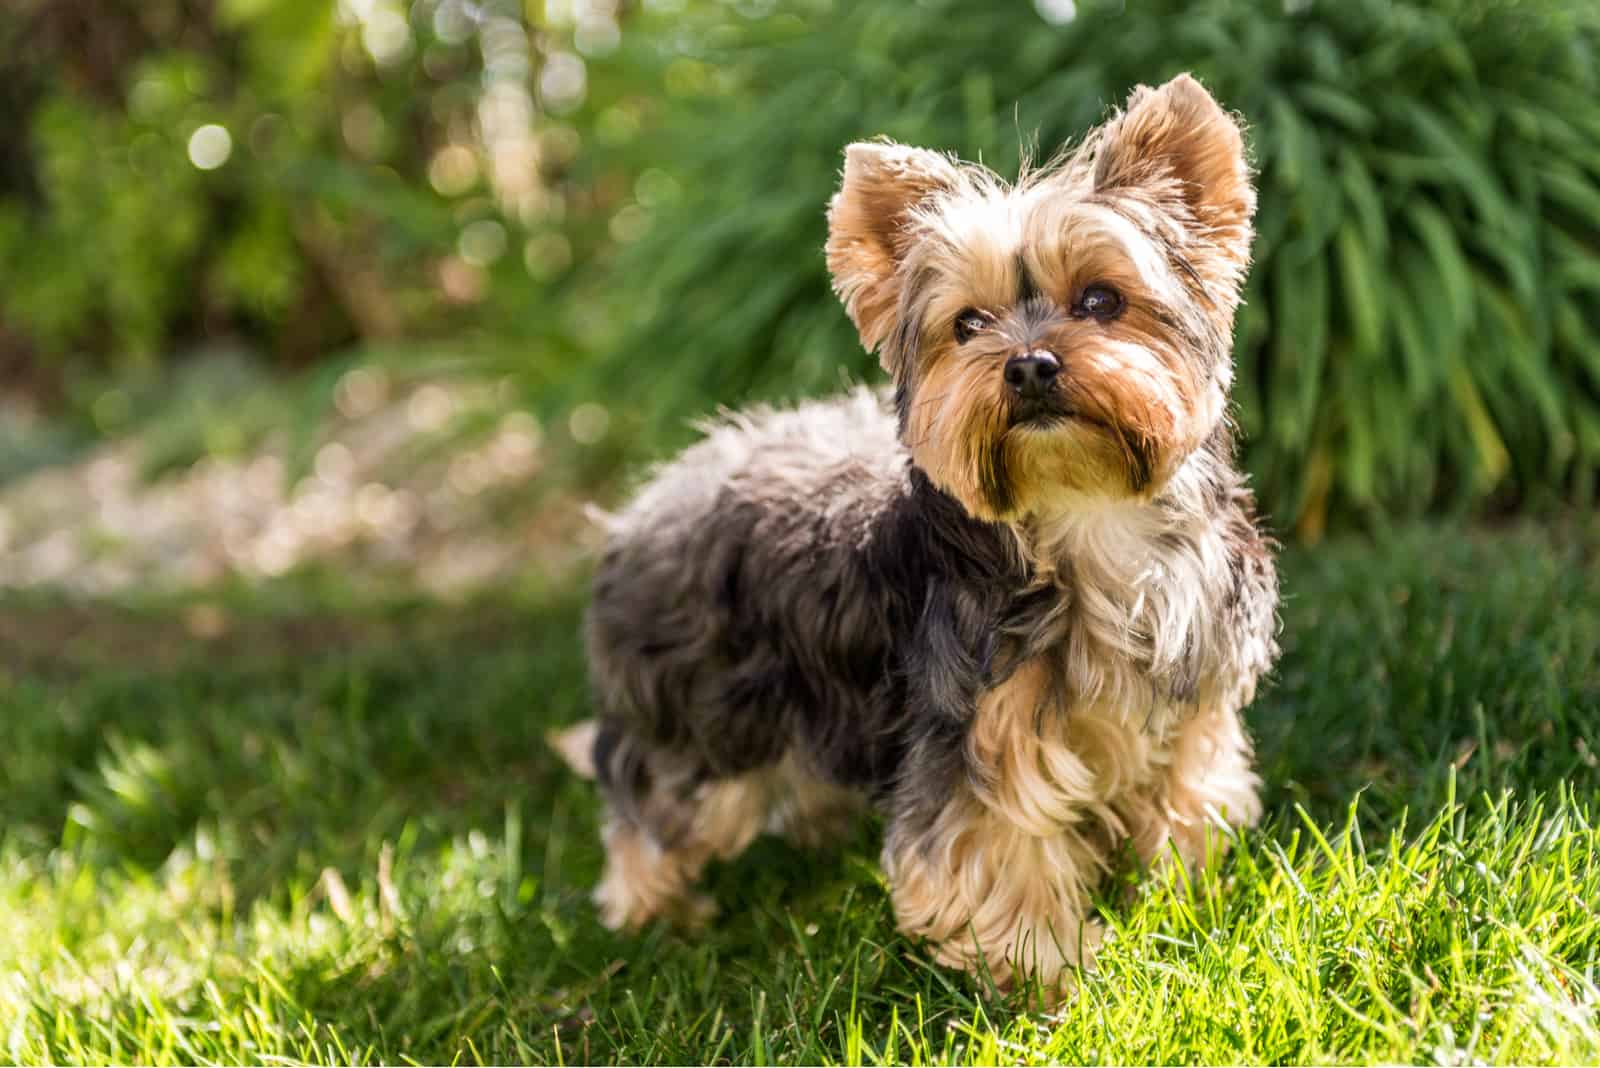 the beautiful Yorkshire Terrier stands in the park